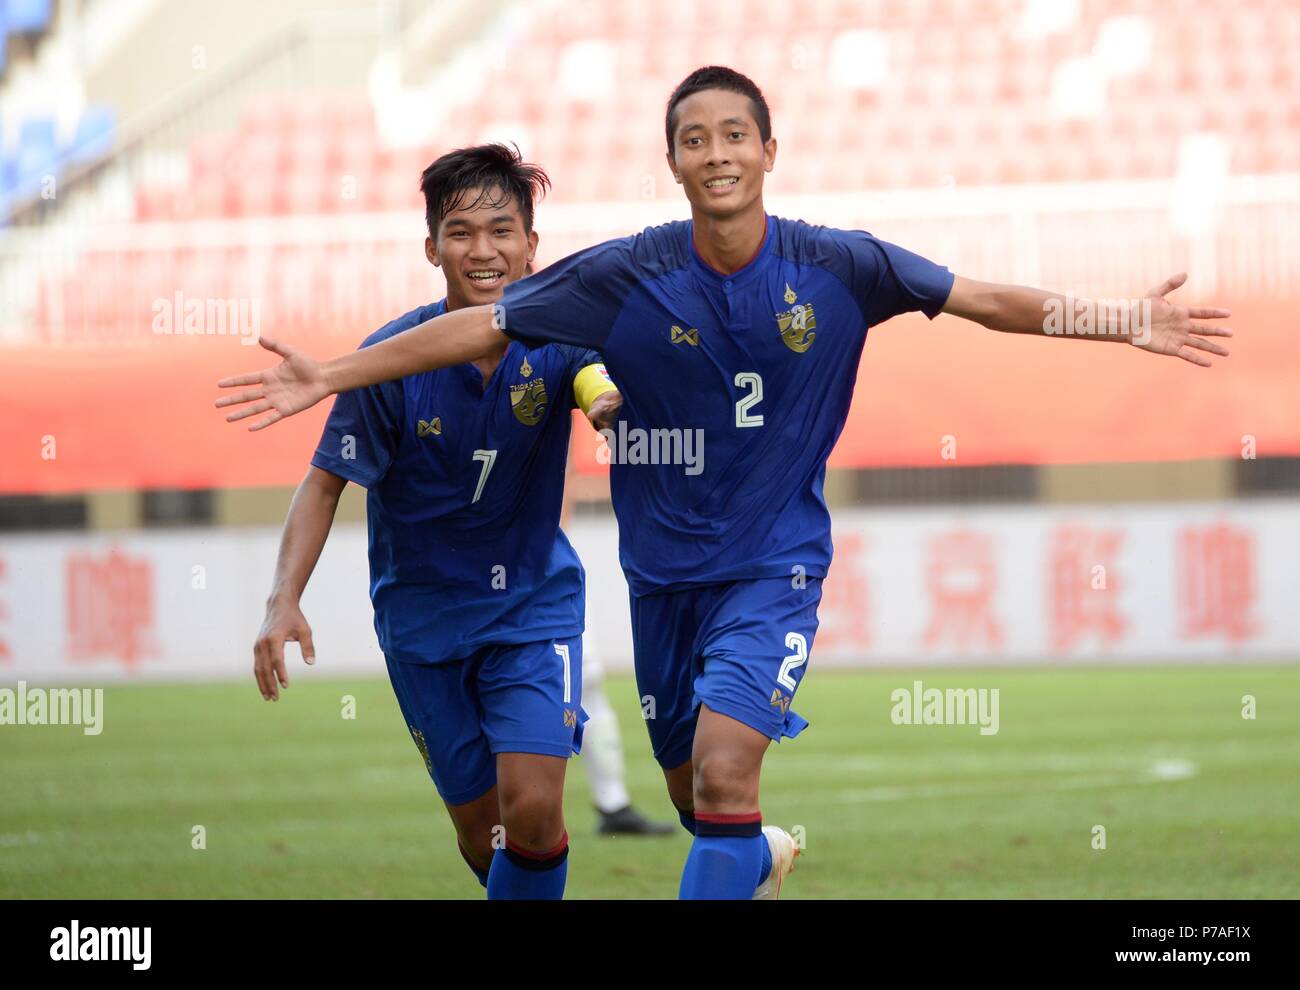 Weinan, China's Shaanxi Province. 5th July, 2018. Arthit Buangam (R) of  Thailand celebrates after scoring during the CFA International Youth  Football Tournament Weinan 2018 between Thailand U17 national team and  India U17